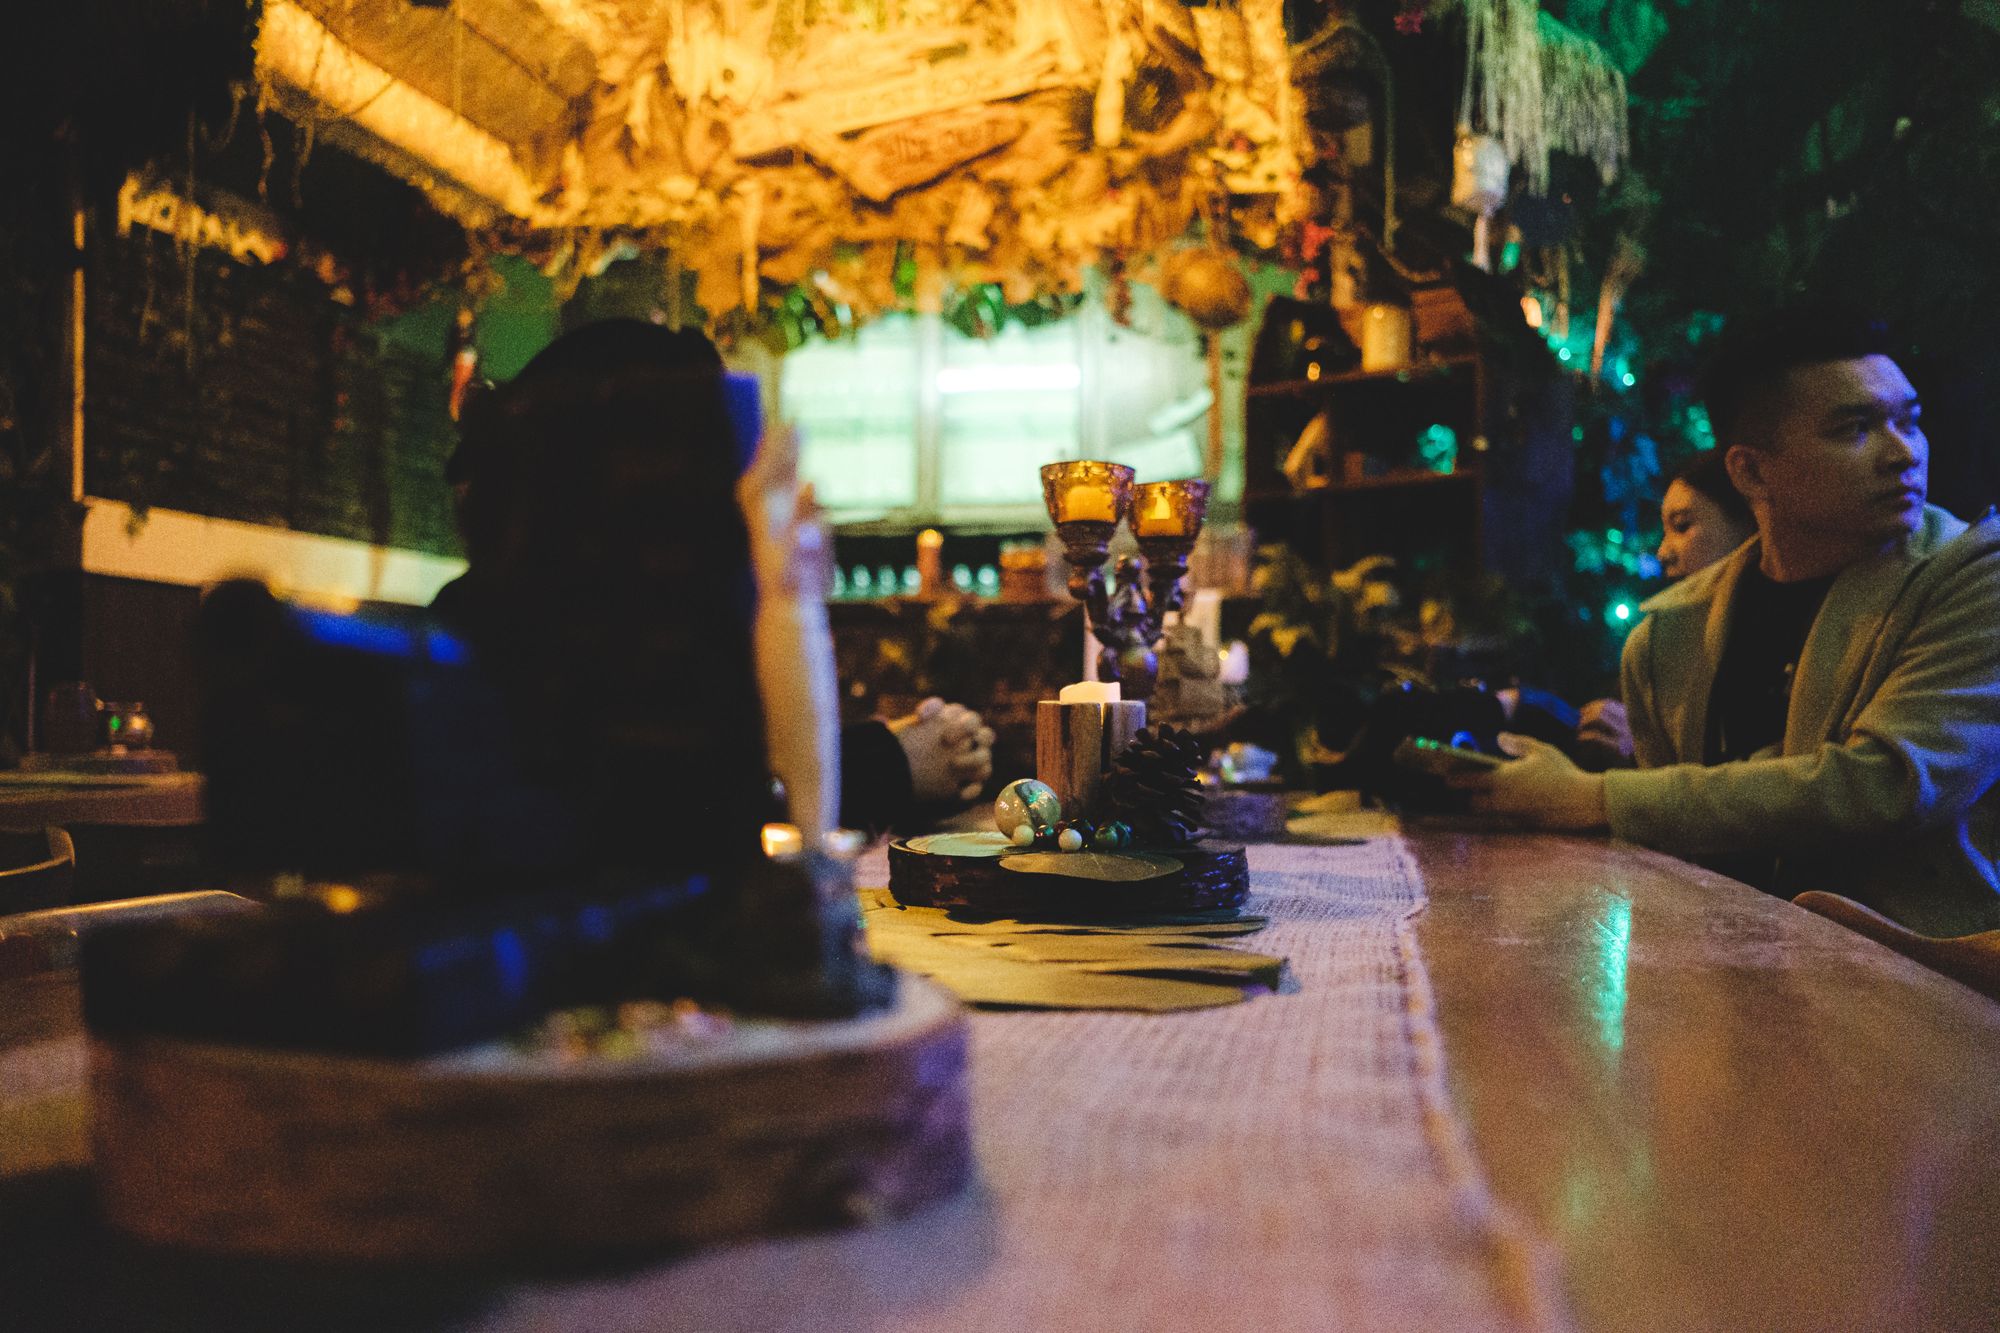 Neverland, an Immersive Peter Pan Inspired Bar Vancouver